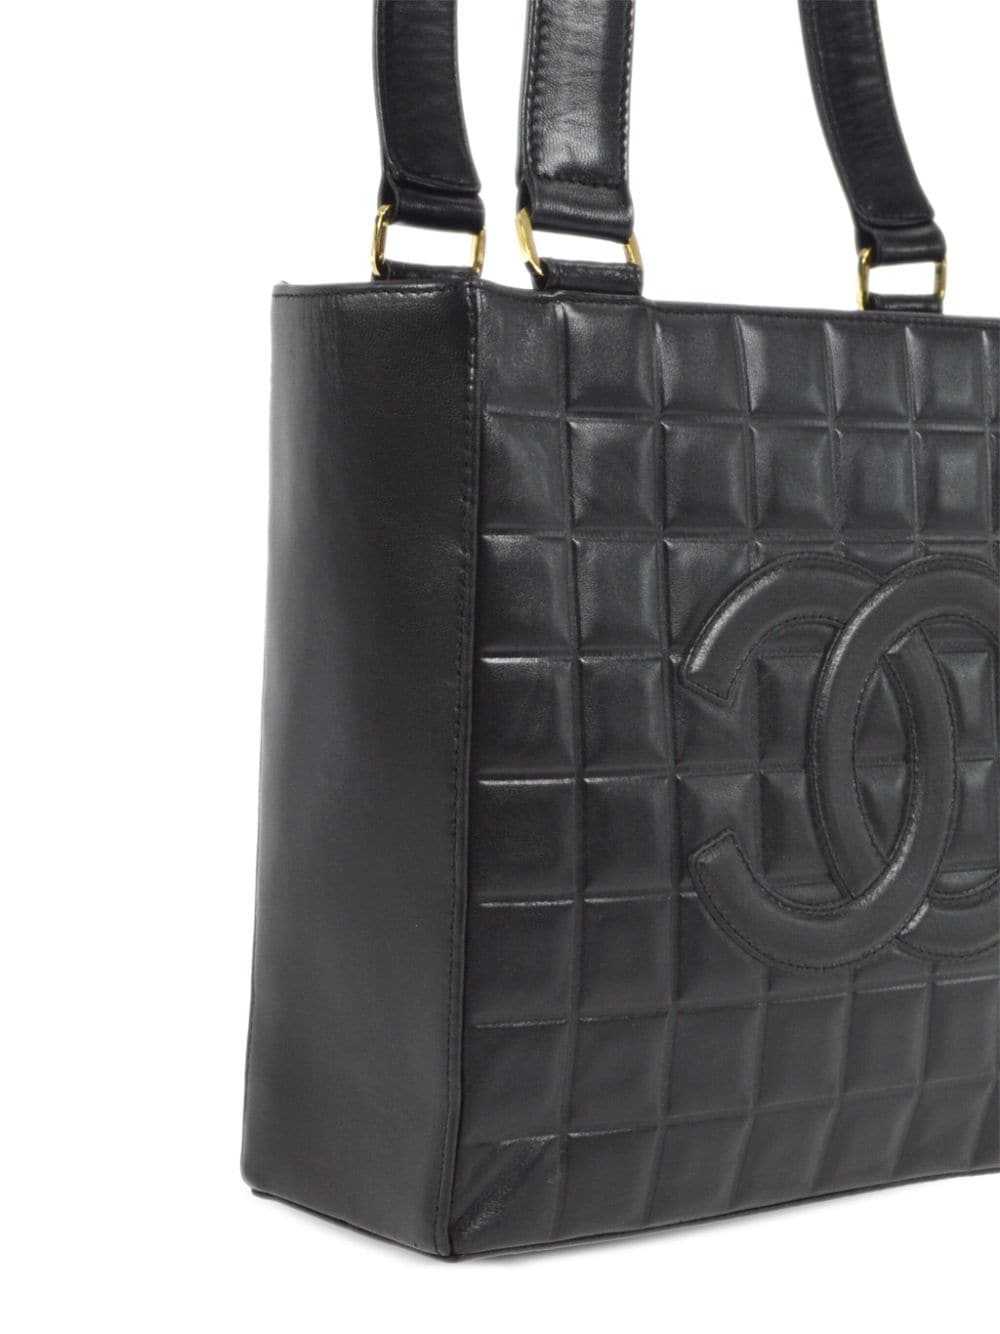 Chanel Pre-owned 2002 Medallion Tote Bag - Brown